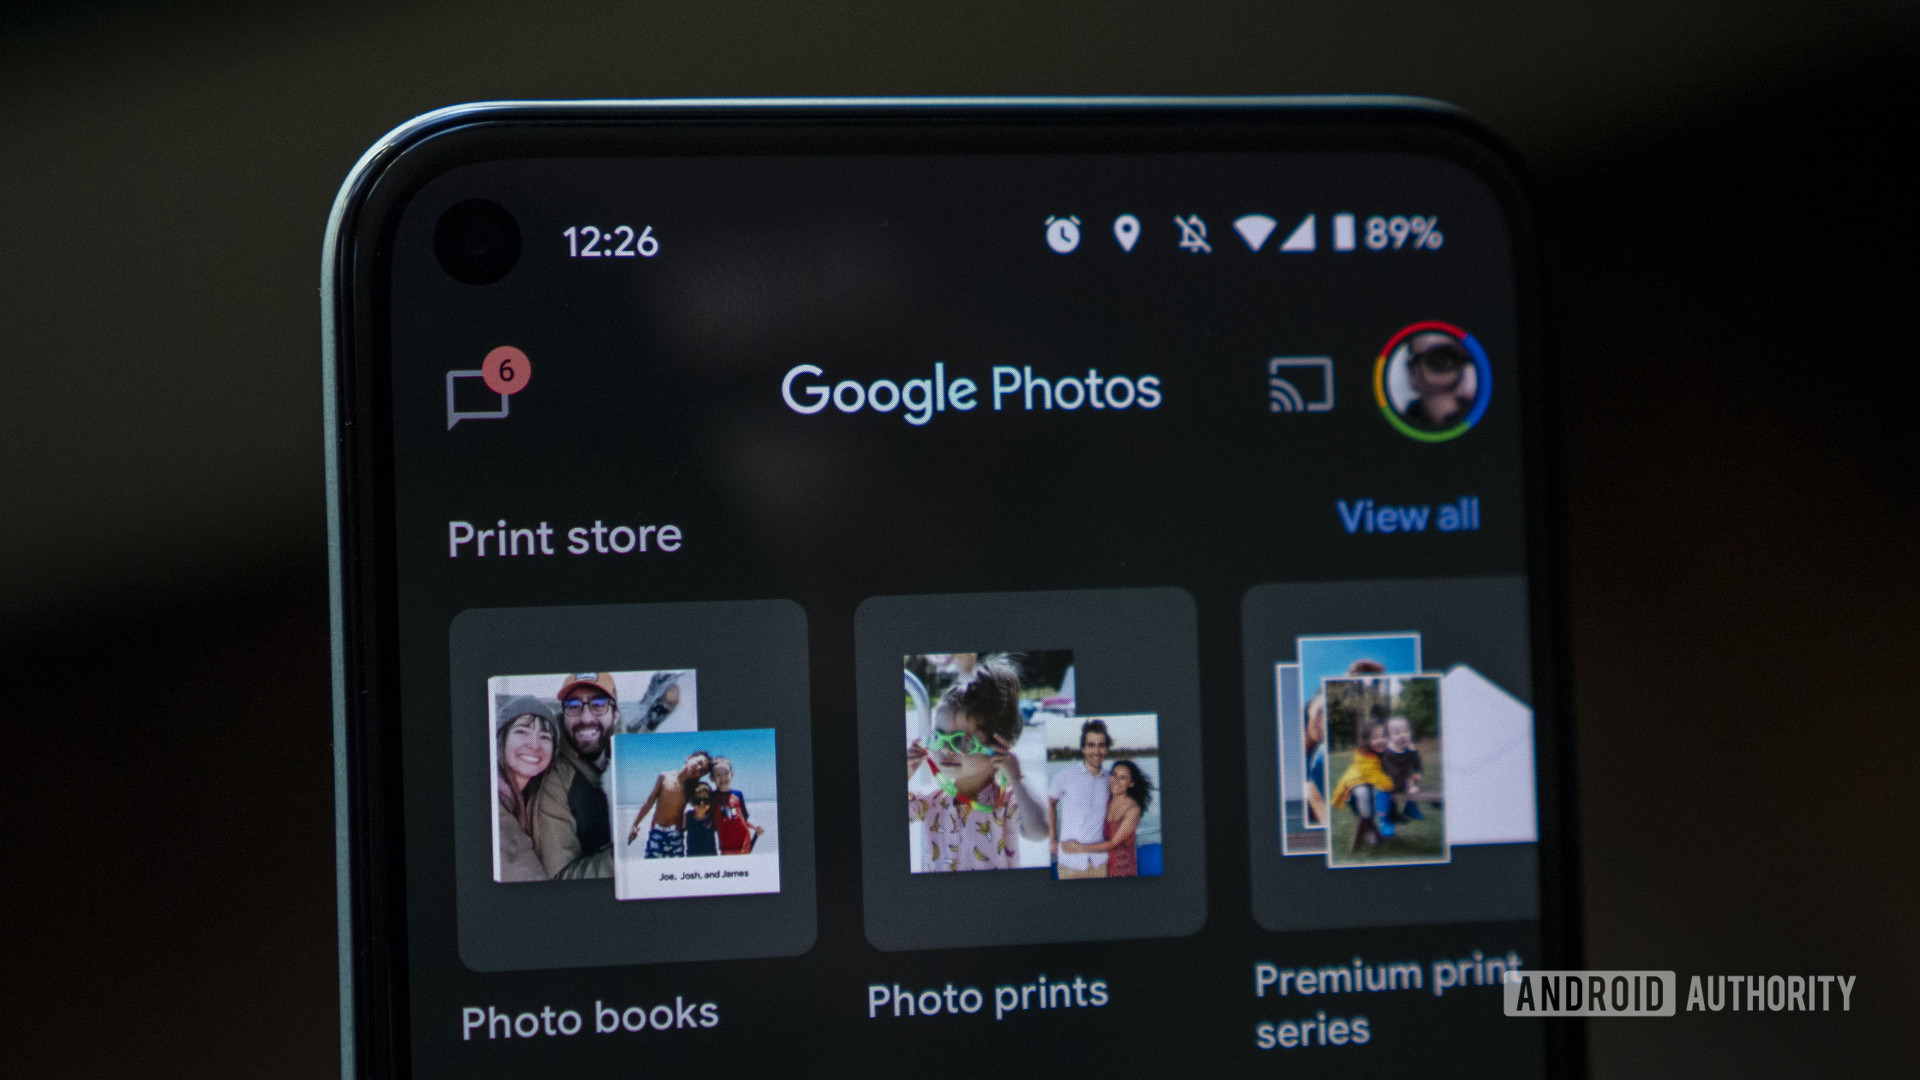 How to delete photos from Google Photos - Android Authority